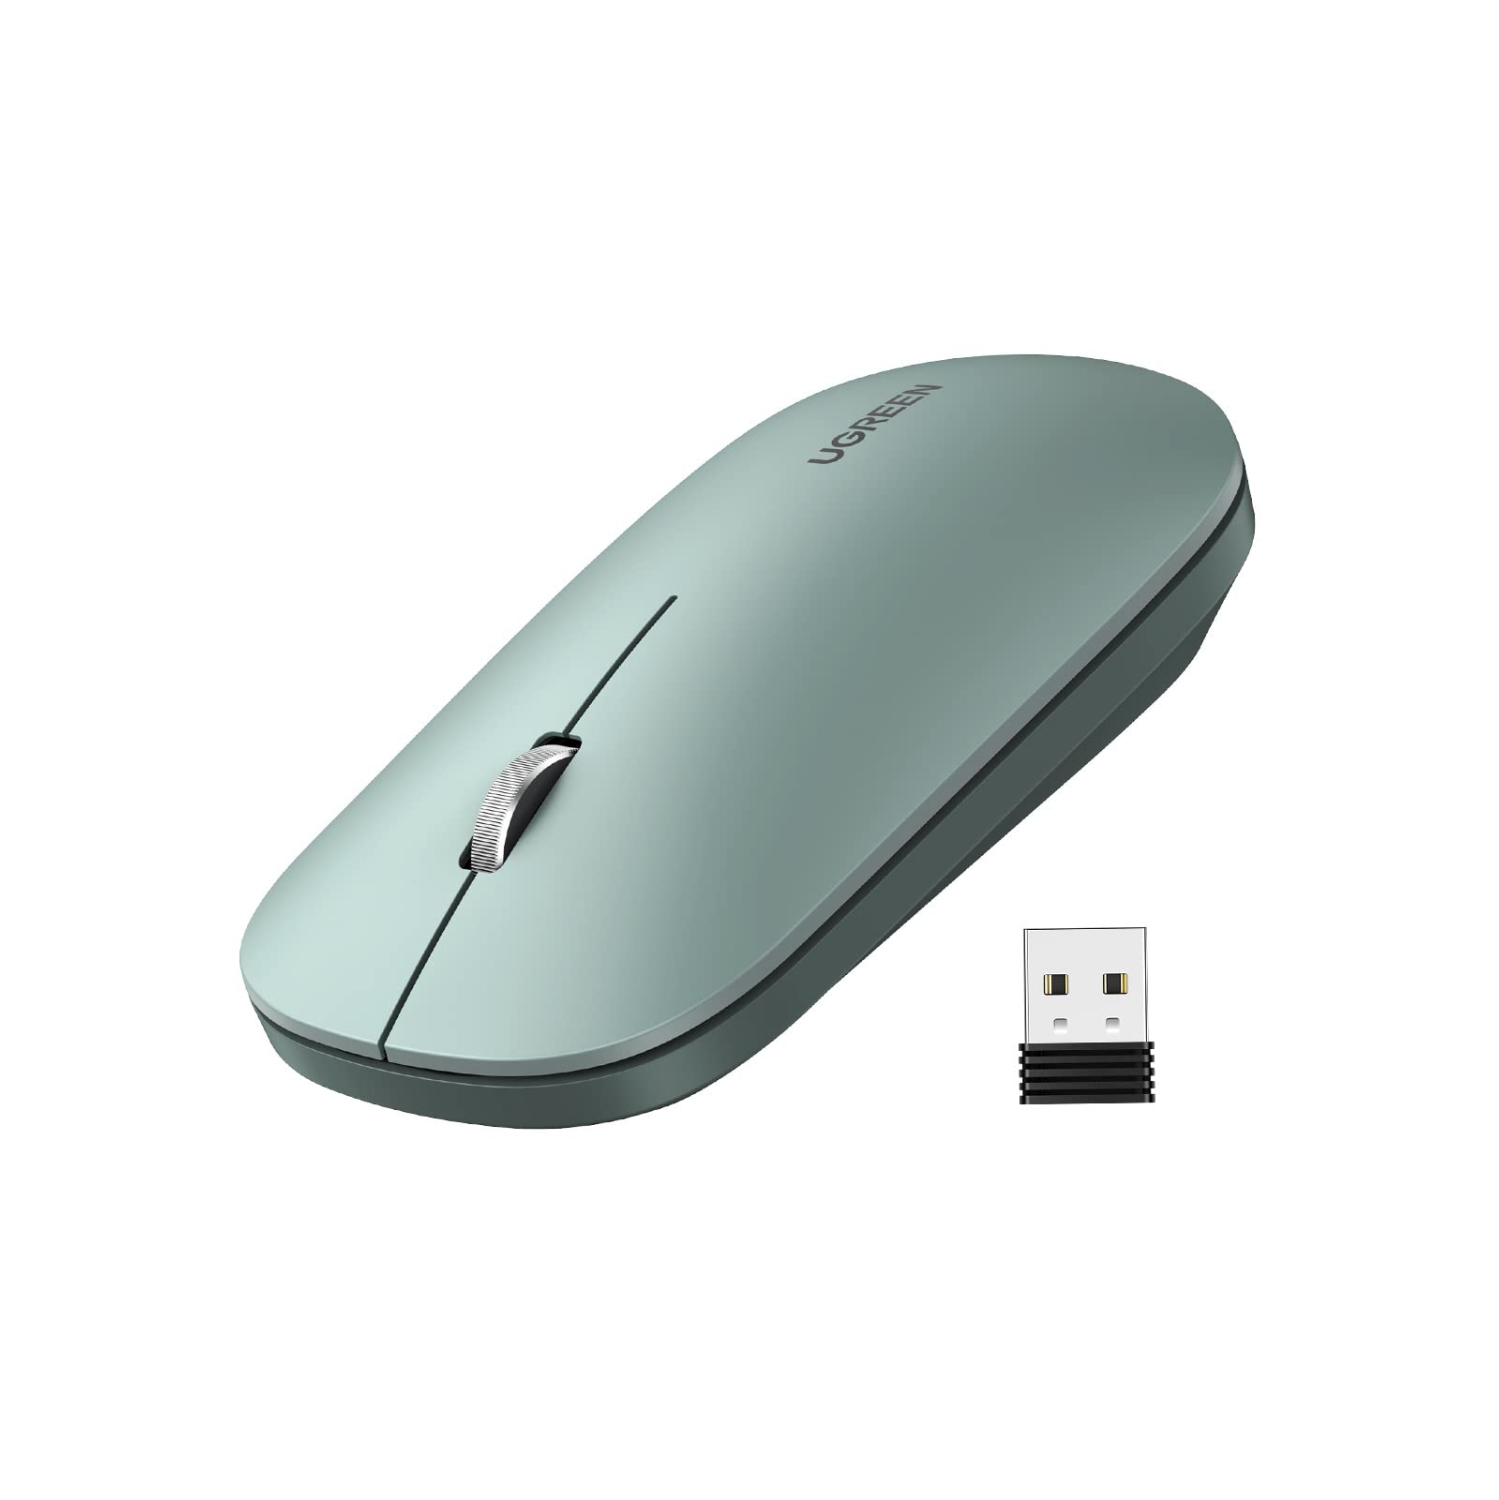 UGREEN Wireless Computer Mouse for PC Laptop Mouse 2.4G with 4000 DPI Slim Silent Mouse Cordless USB Mouse with 18-Month Bat